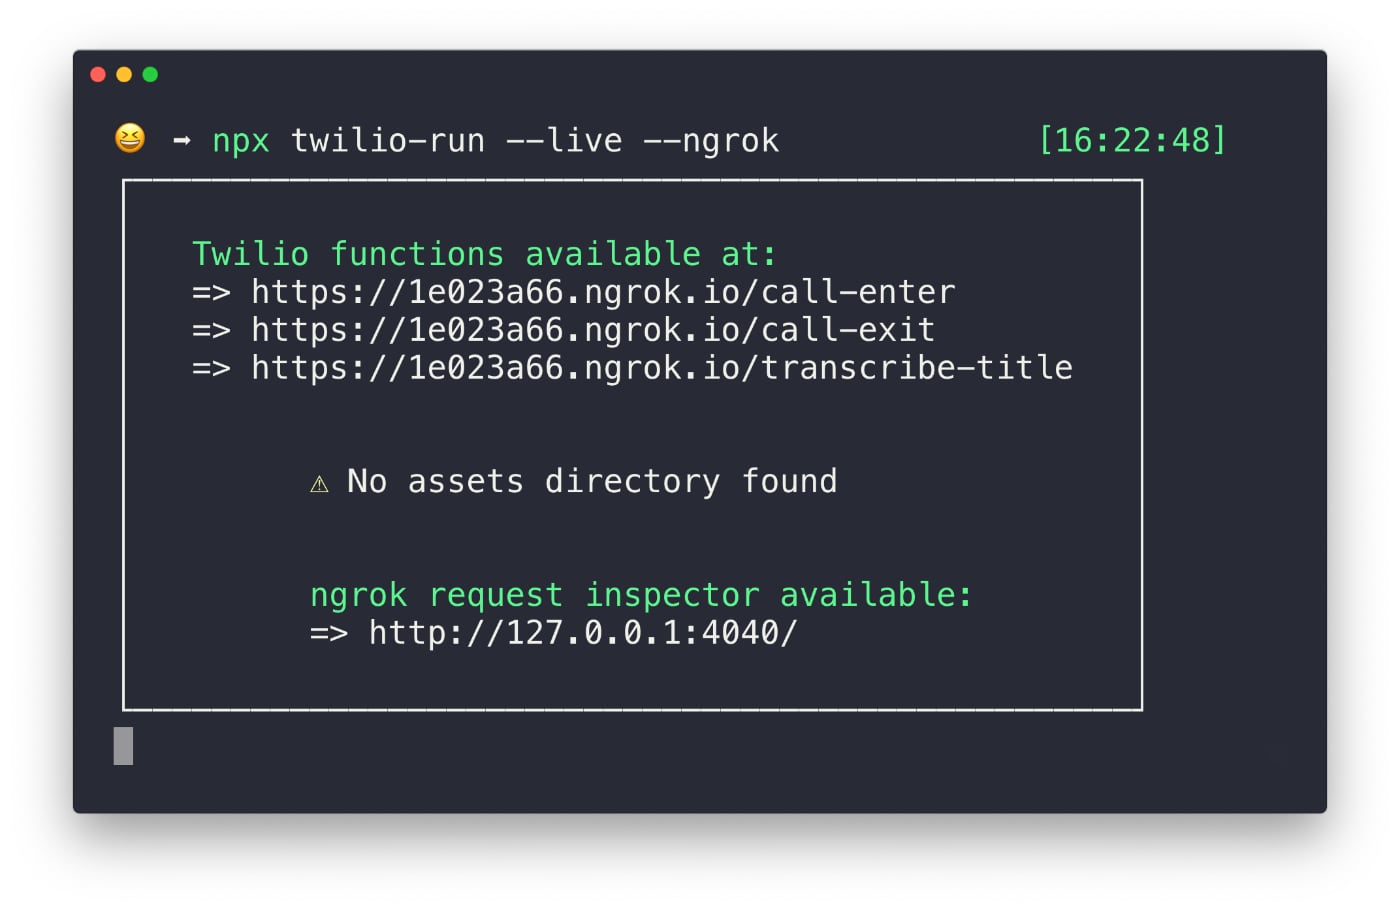 Terminal showing the live endpoints of Twilio run